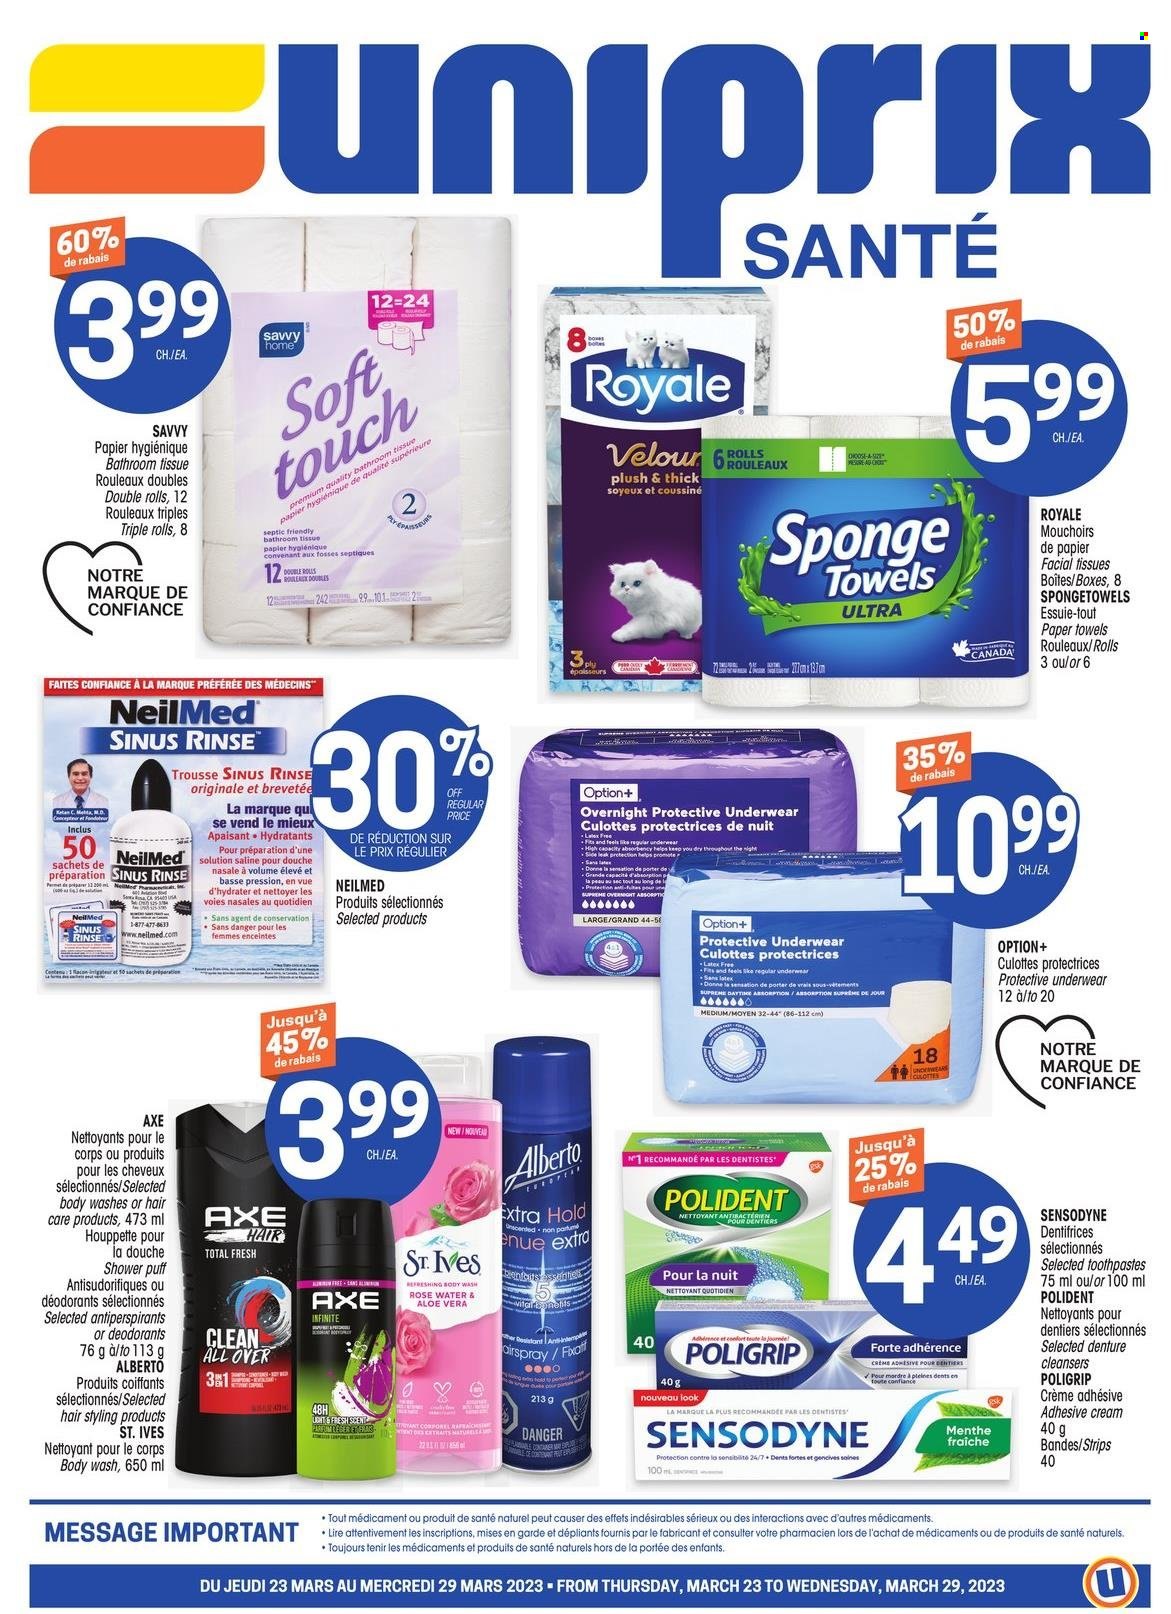 thumbnail - Uniprix Santé Flyer - March 23, 2023 - March 29, 2023 - Sales products - Mars, water, bath tissue, kitchen towels, paper towels, body wash, Polident, facial tissues, Axe, Sensodyne, deodorant. Page 1.